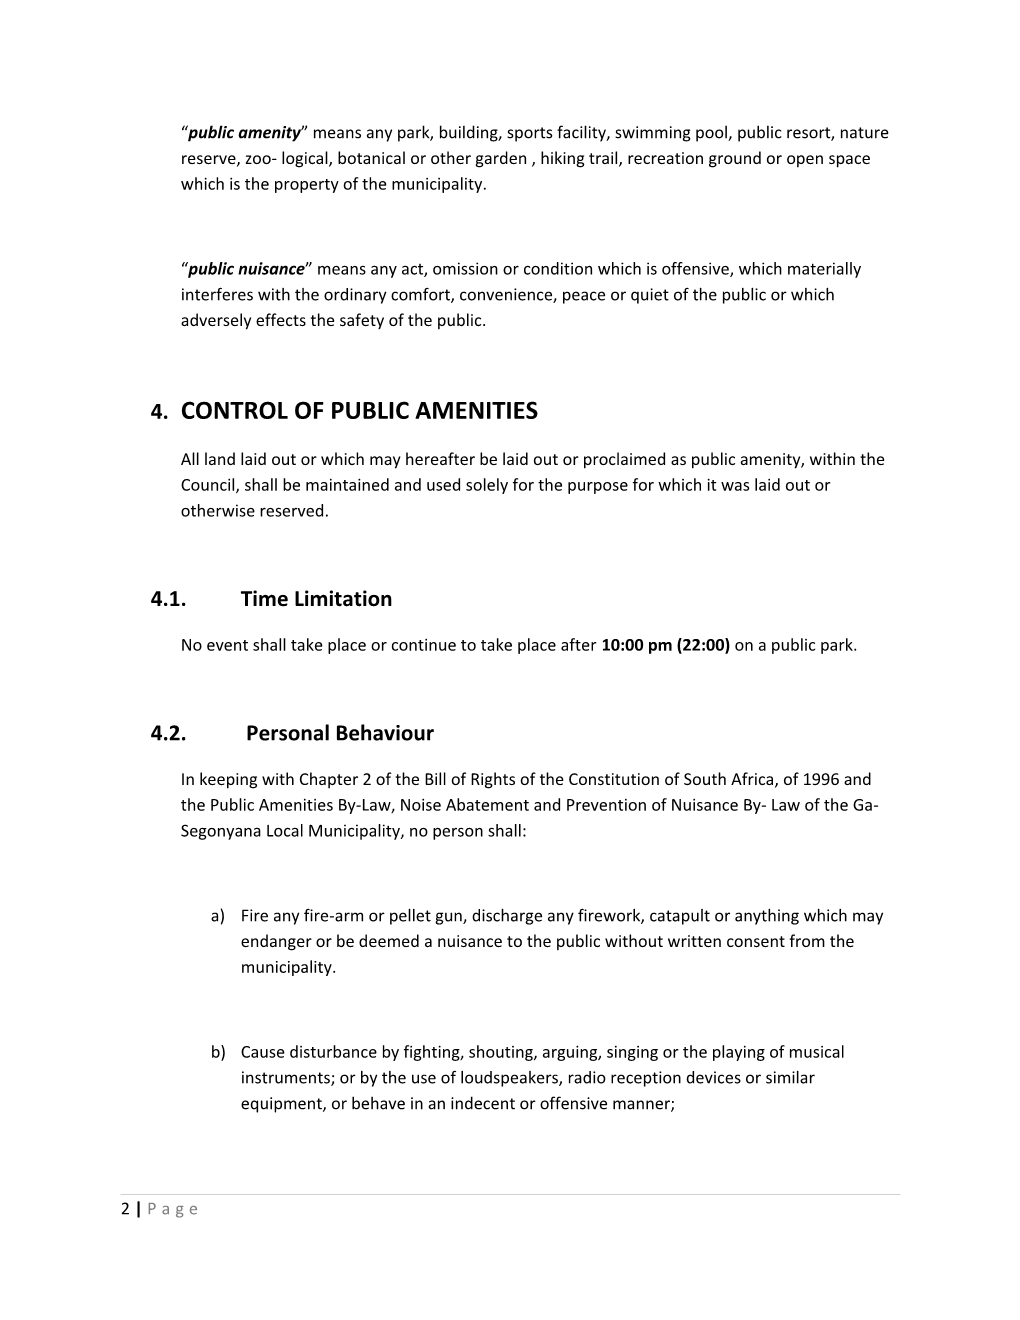 Draft Policy on the Use of Public Amenities